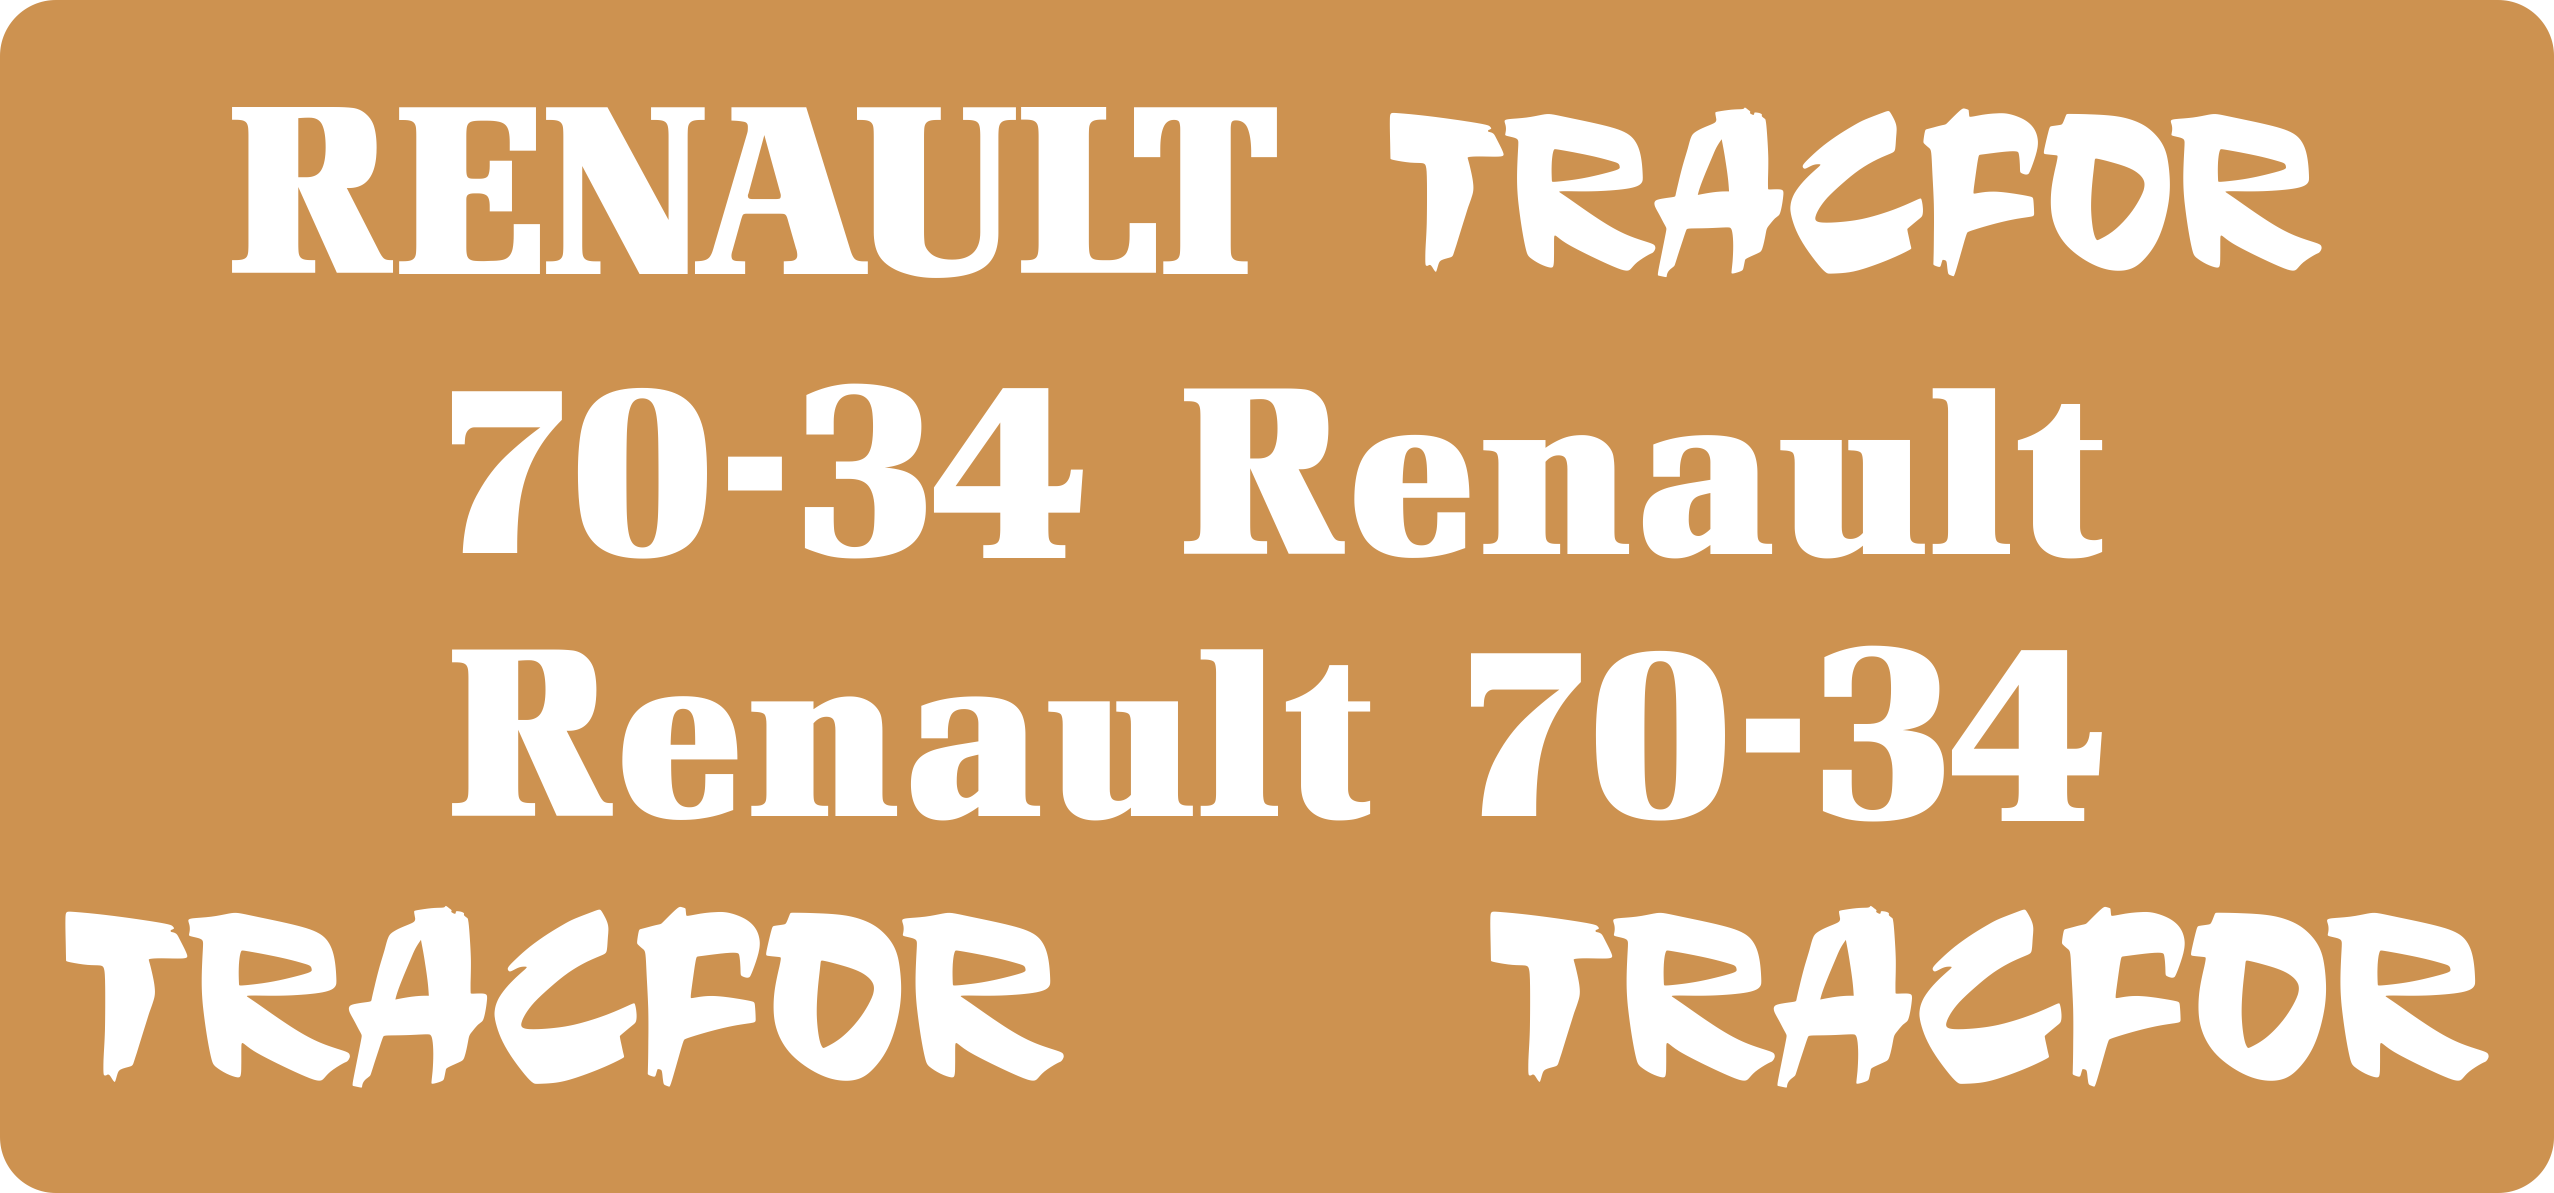 stickers RENAULT 70-34 Tracfor